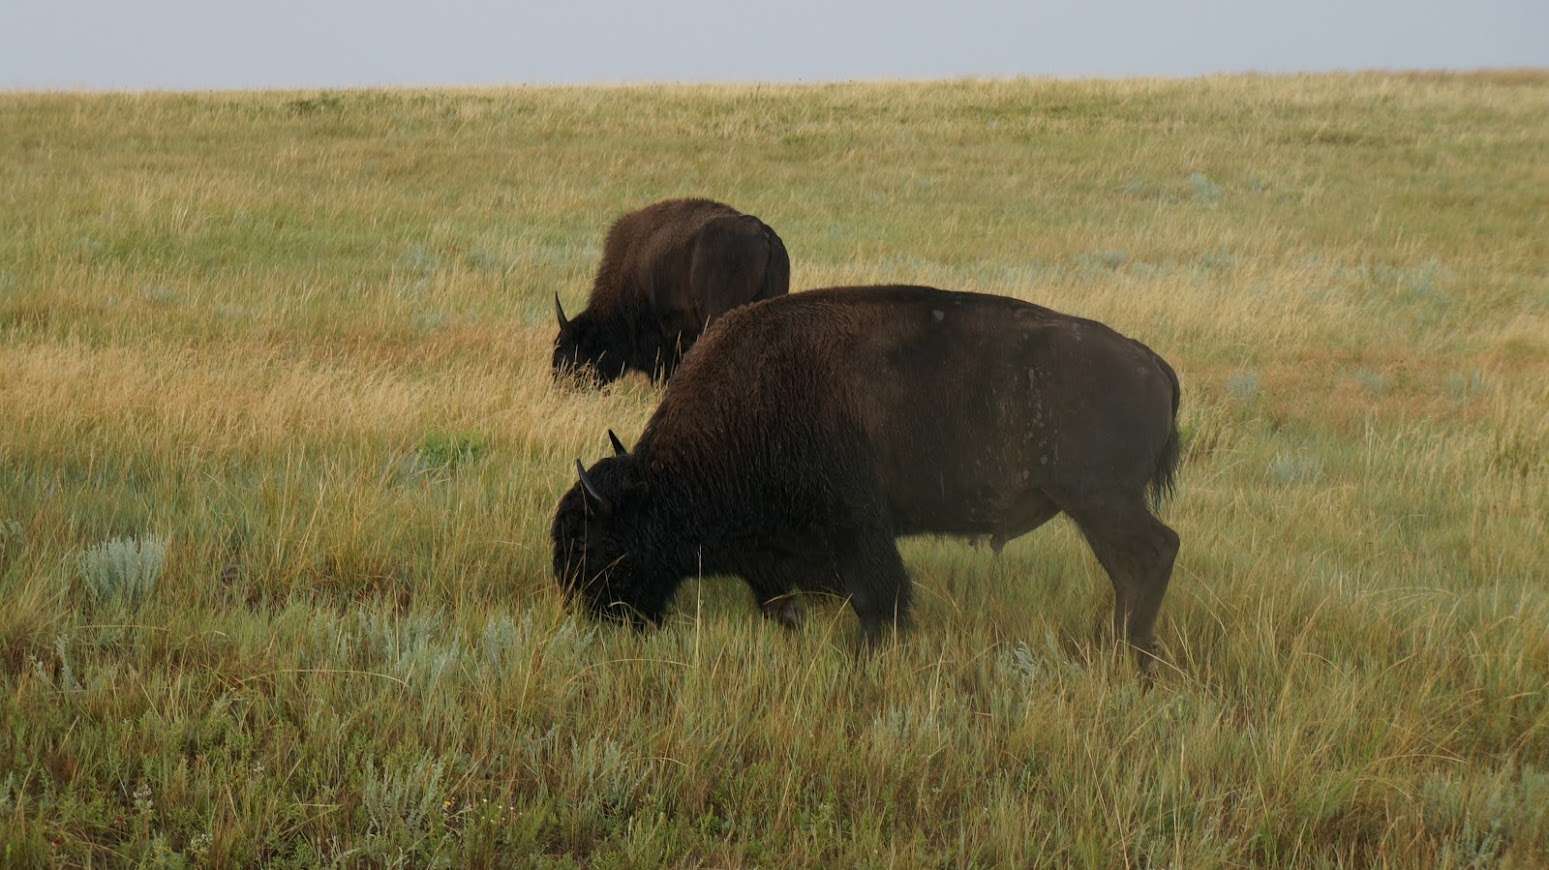 Two bison grazing in grass.